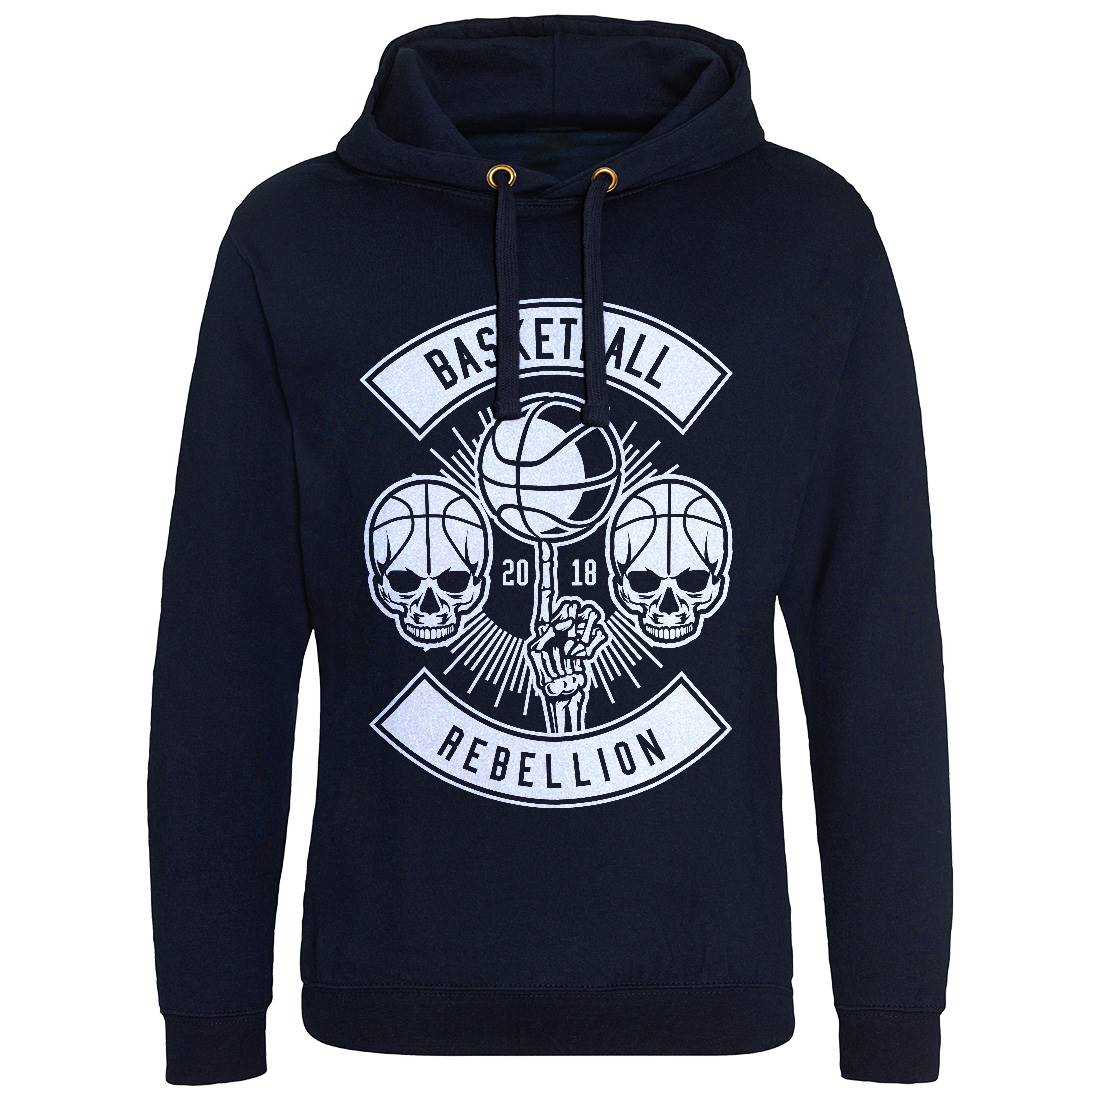 Basketball Rebellion Mens Hoodie Without Pocket Sport B492